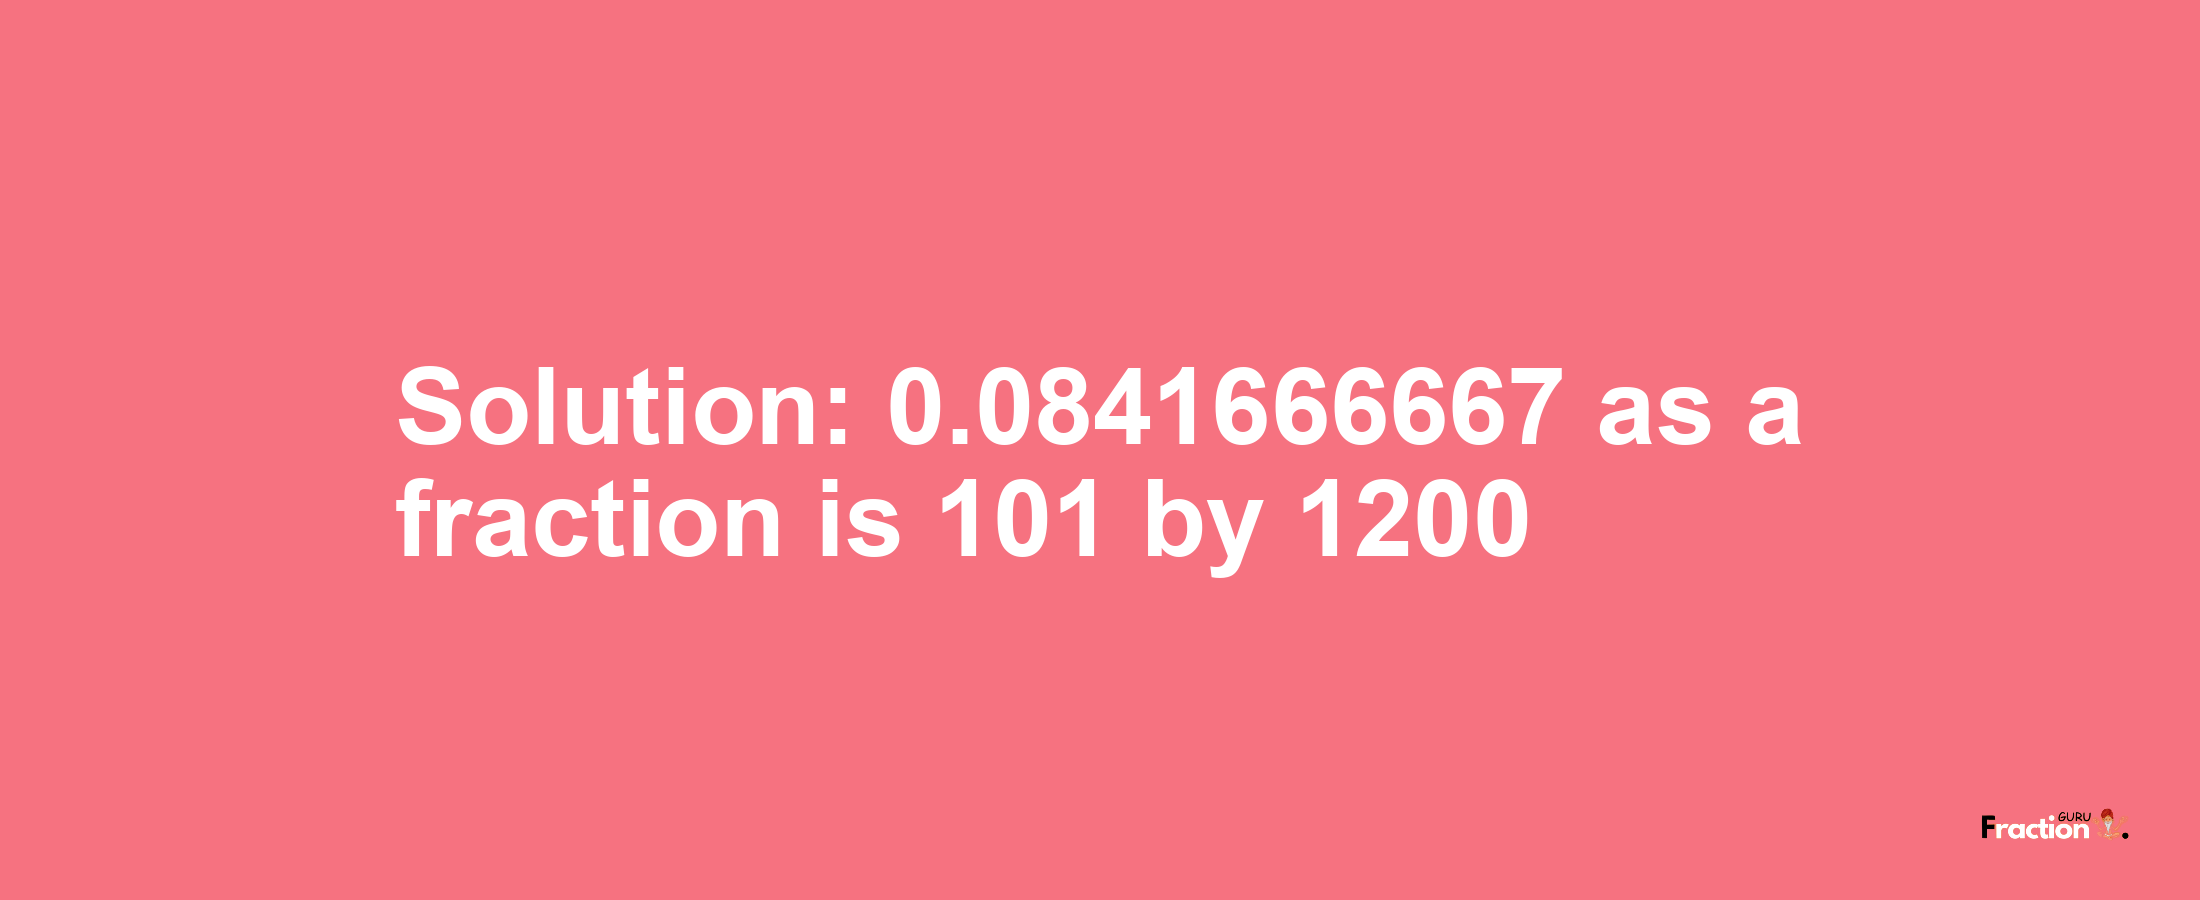 Solution:0.0841666667 as a fraction is 101/1200